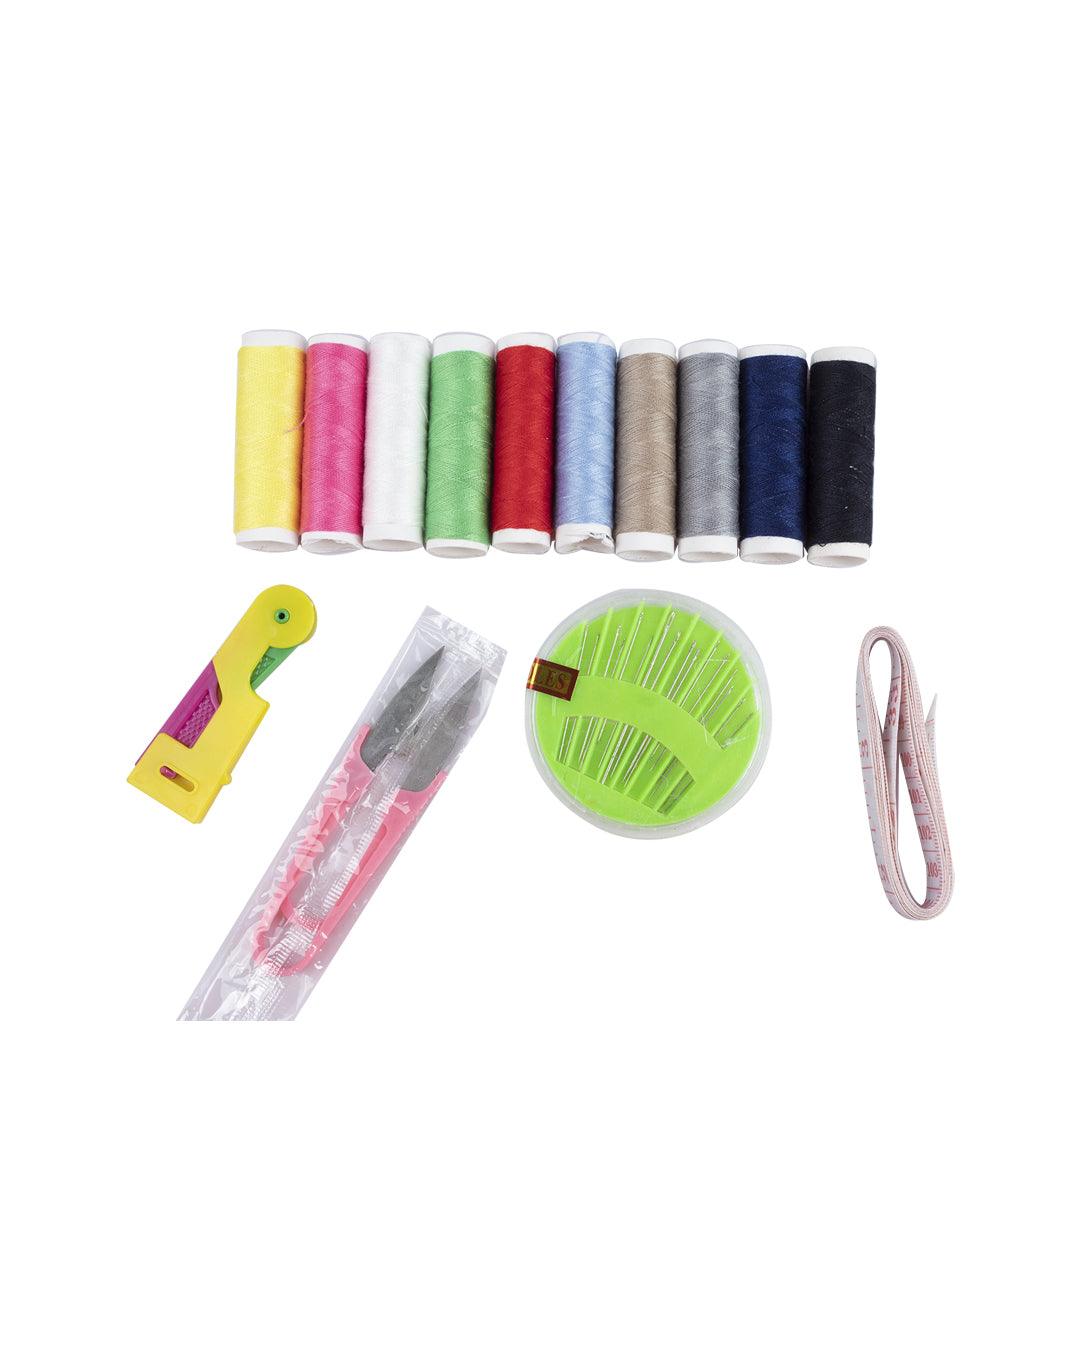 Sewing Accessories Set, Pink, Plastic - MARKET 99